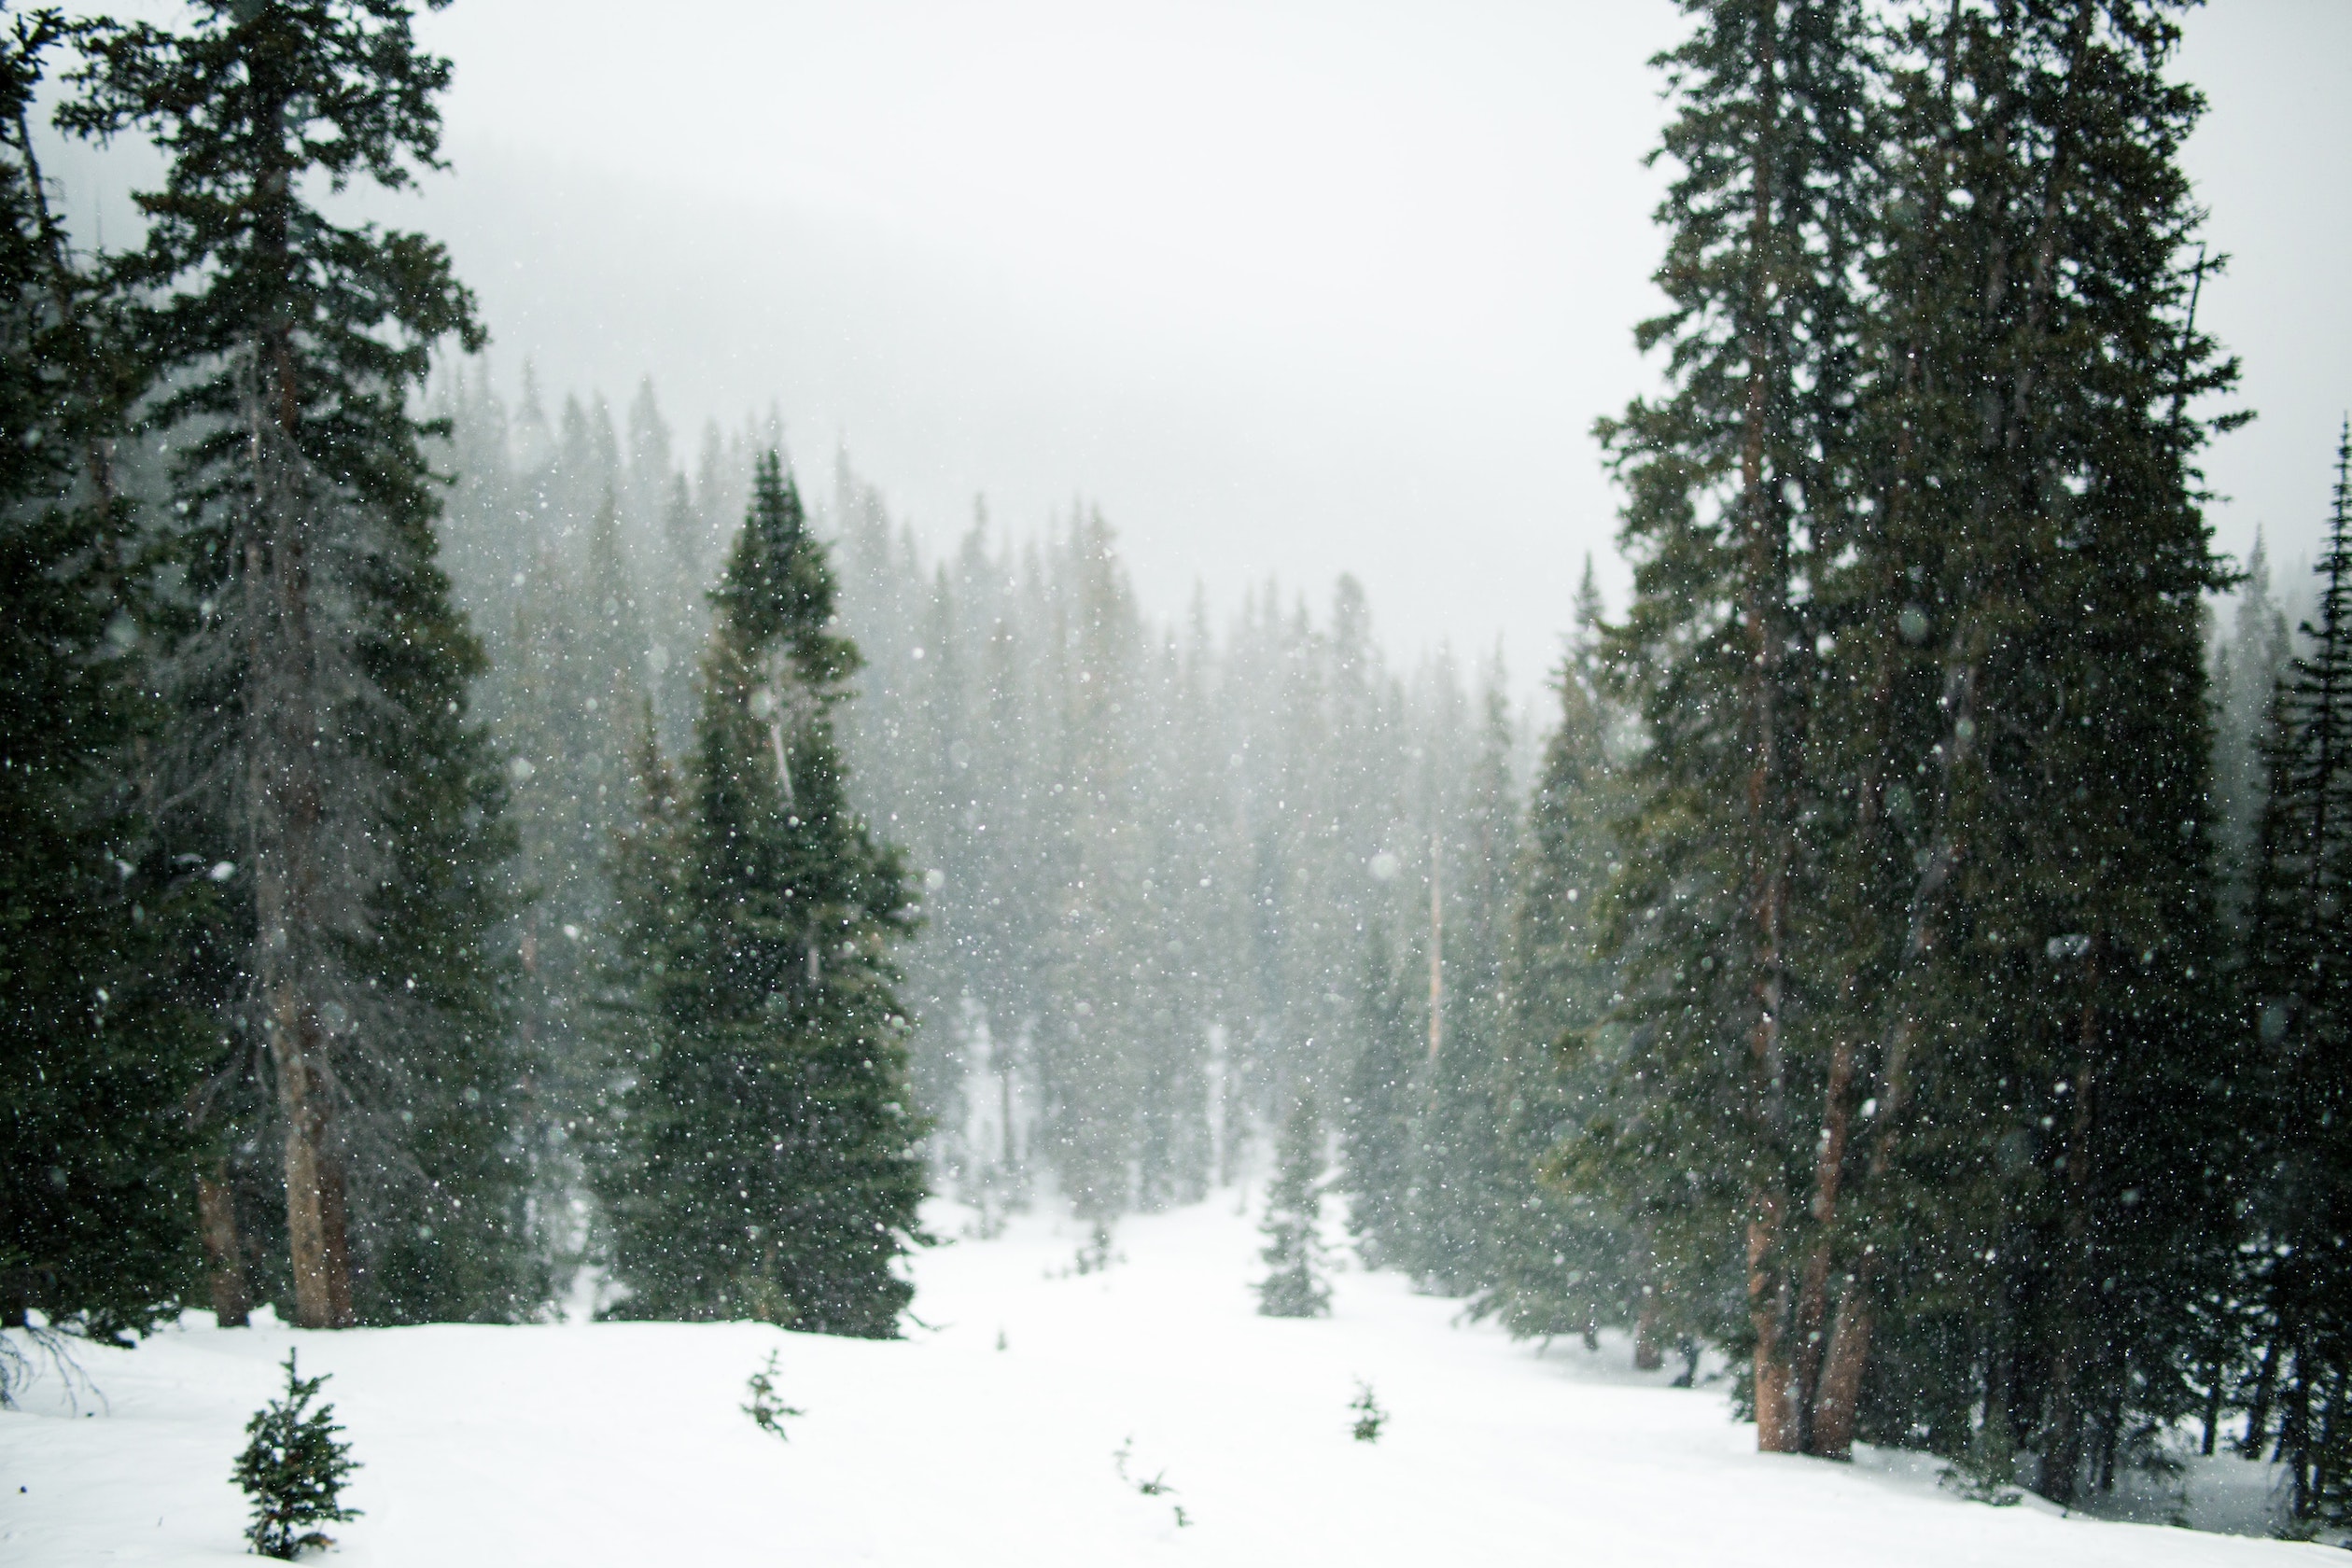 Photo of snow falling on a forest of evergreen trees.